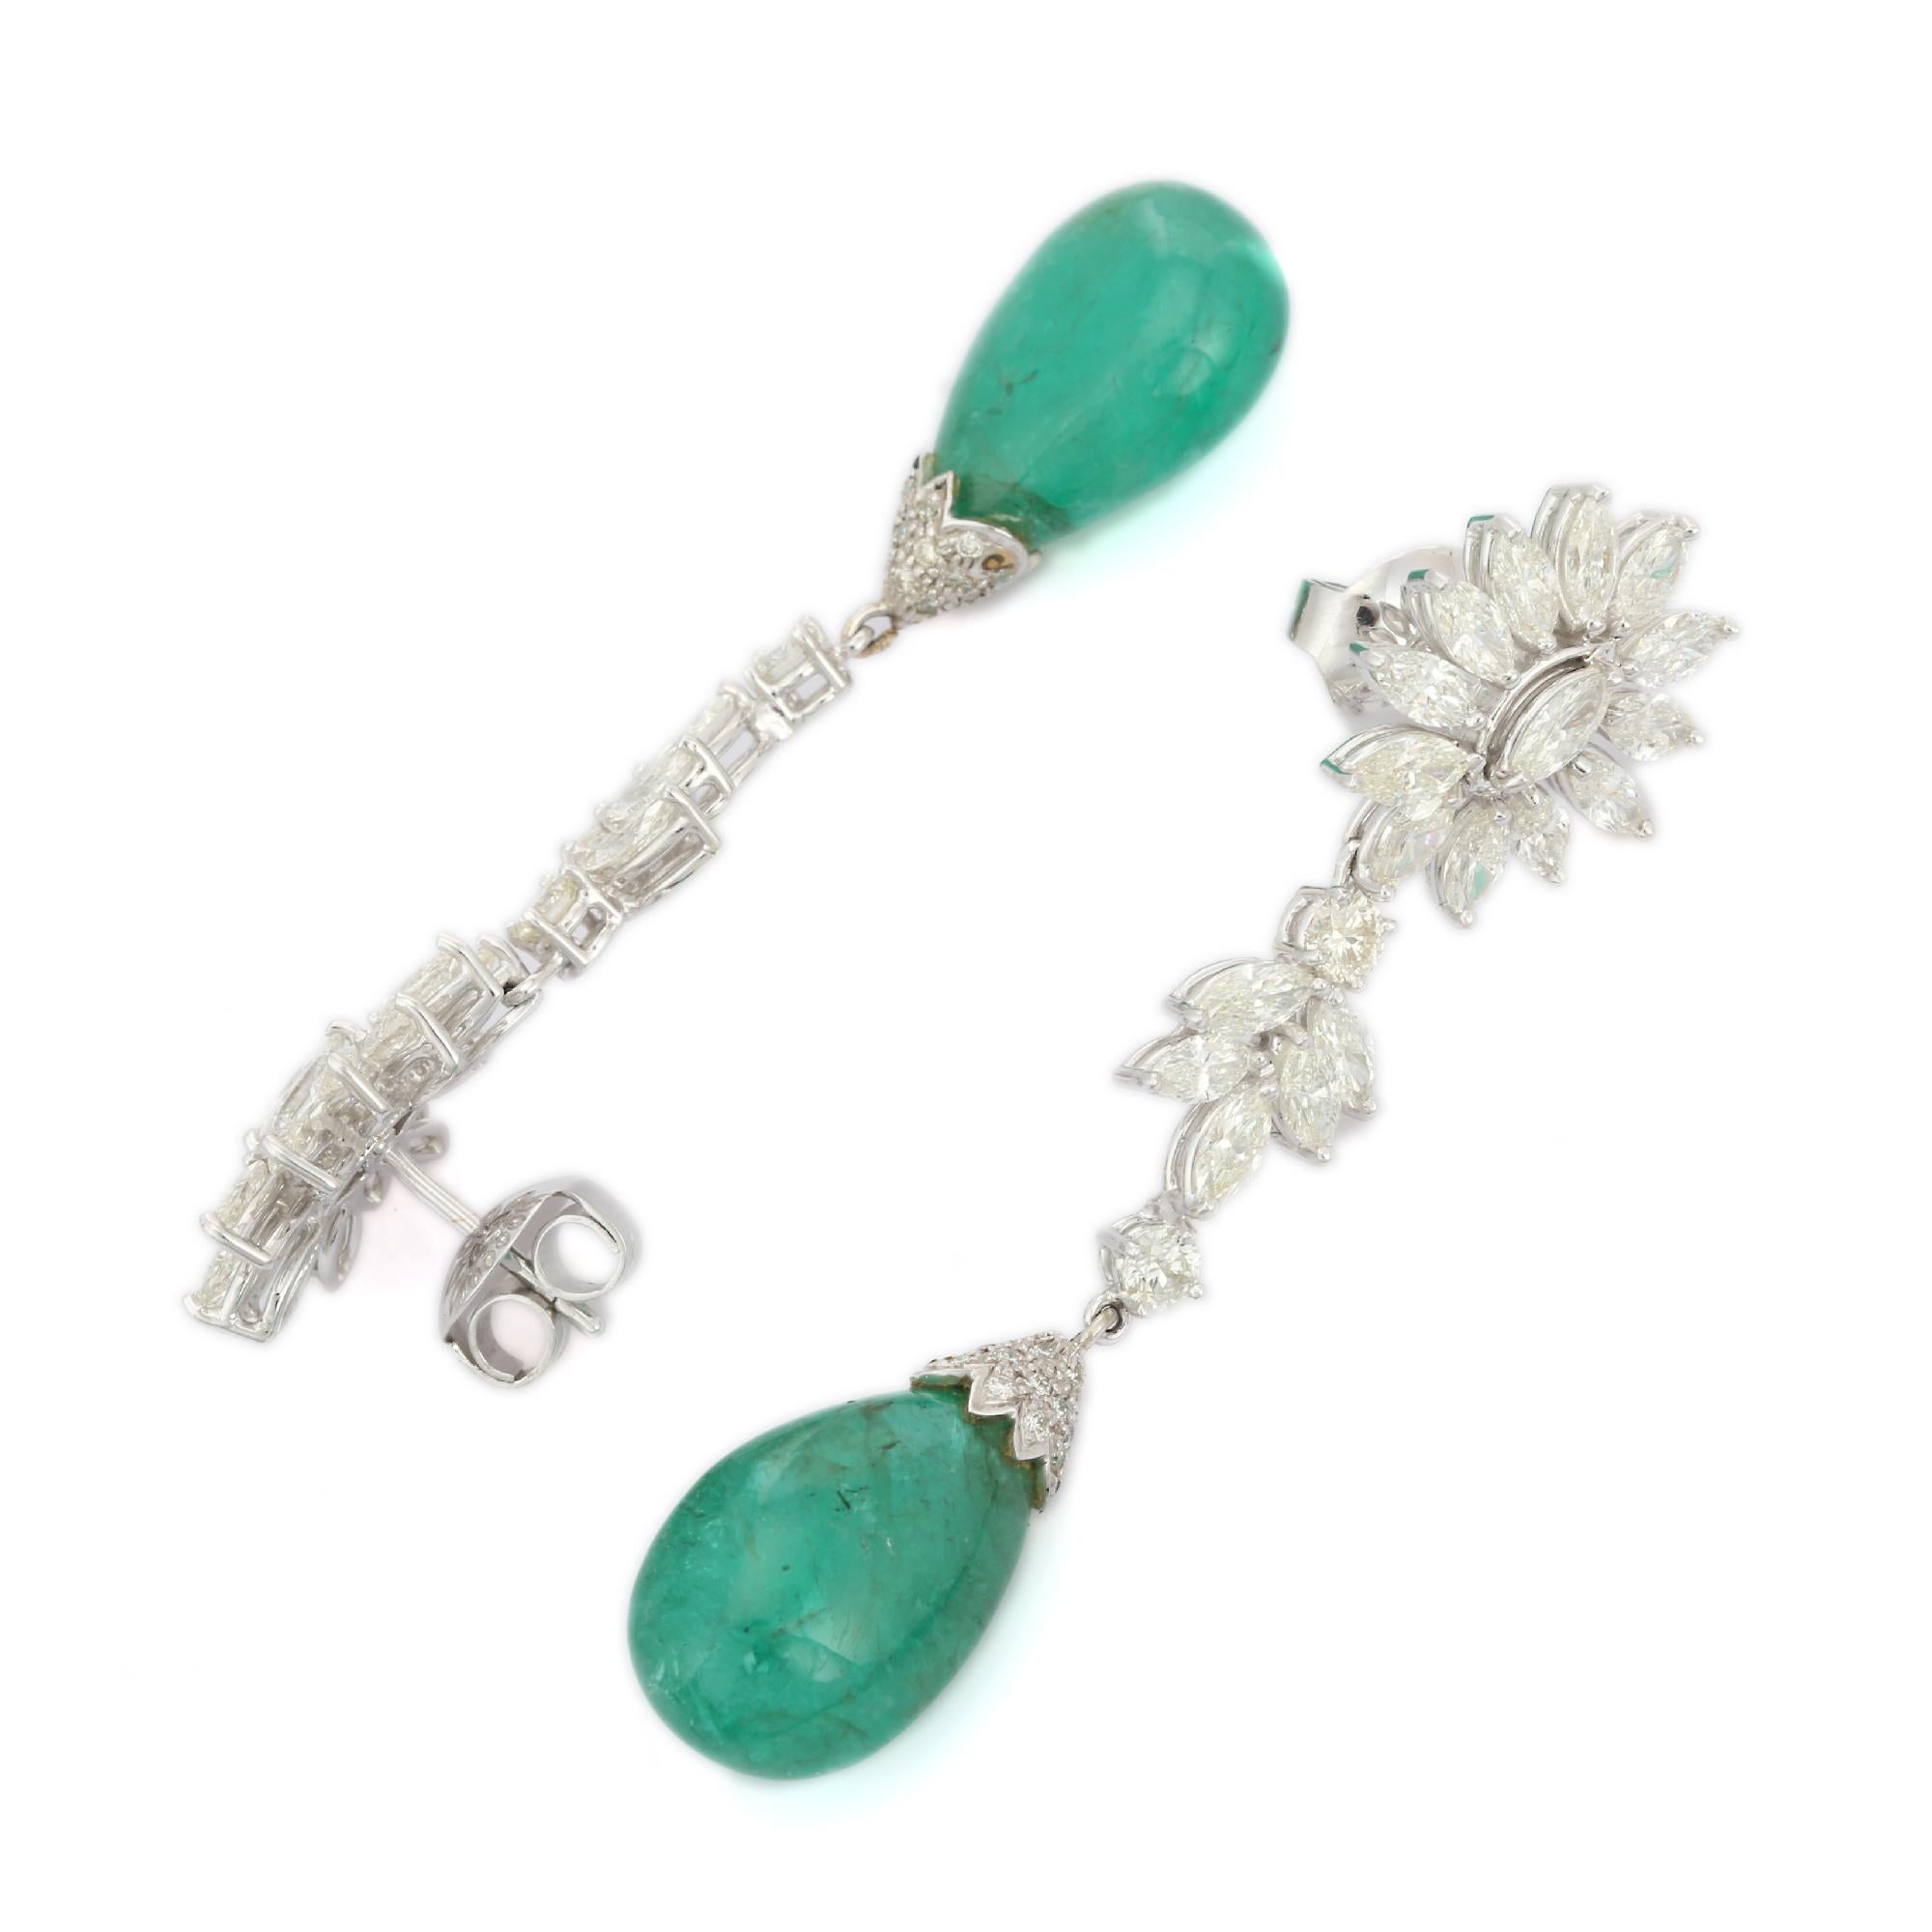 Diamond and Drop Emerald Dangle Earrings in 18K Gold to make a statement with your look. You shall need statement dangle earrings to make a statement with your look. These earrings create a sparkling, luxurious look featuring drop emerald.
Emerald